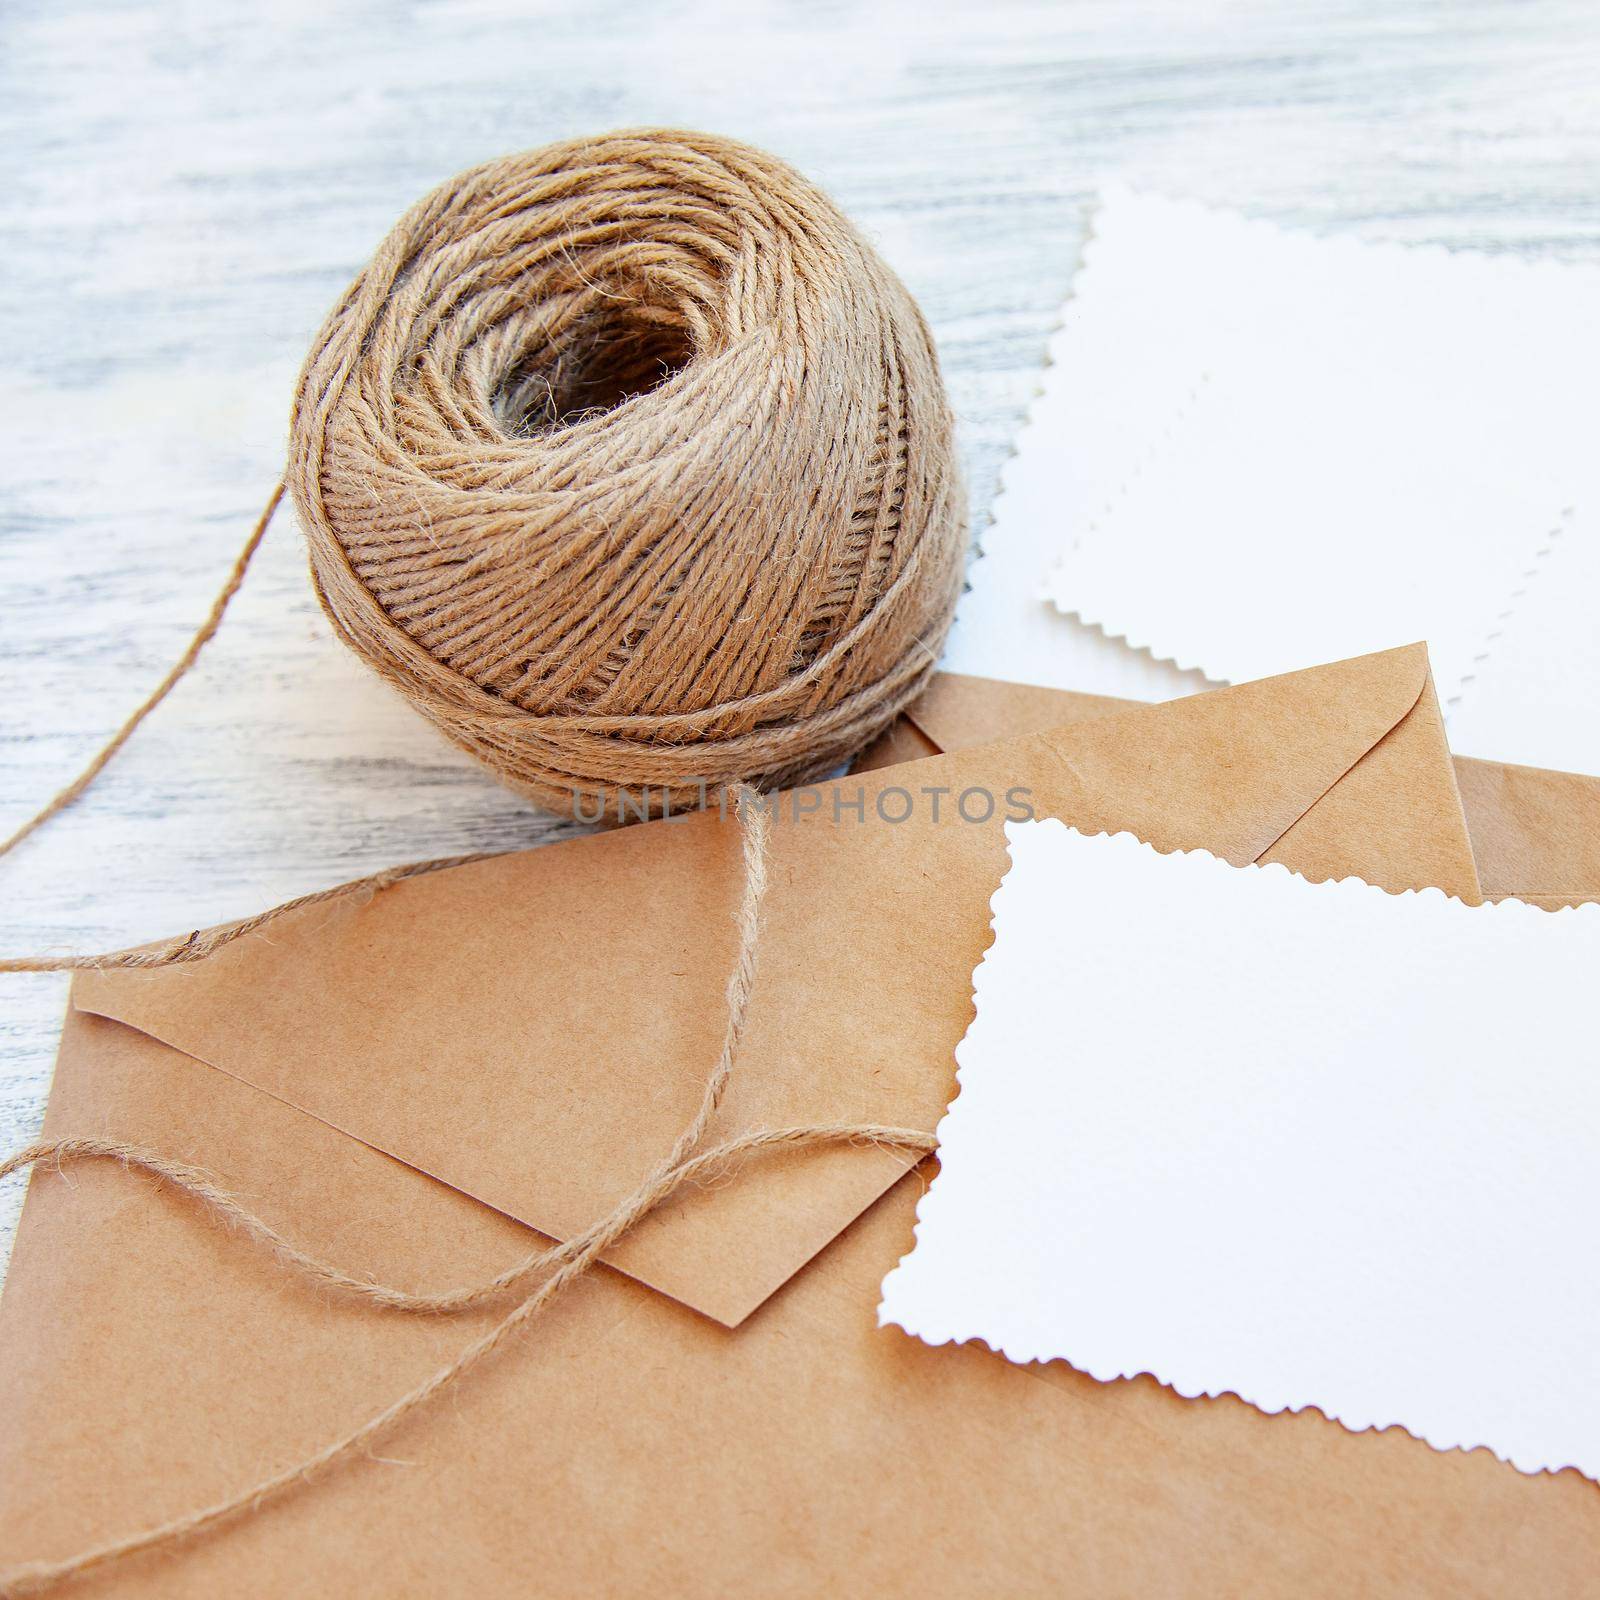 Light stillife with brown rough paper envelopes, skein of cord and blank white empty card